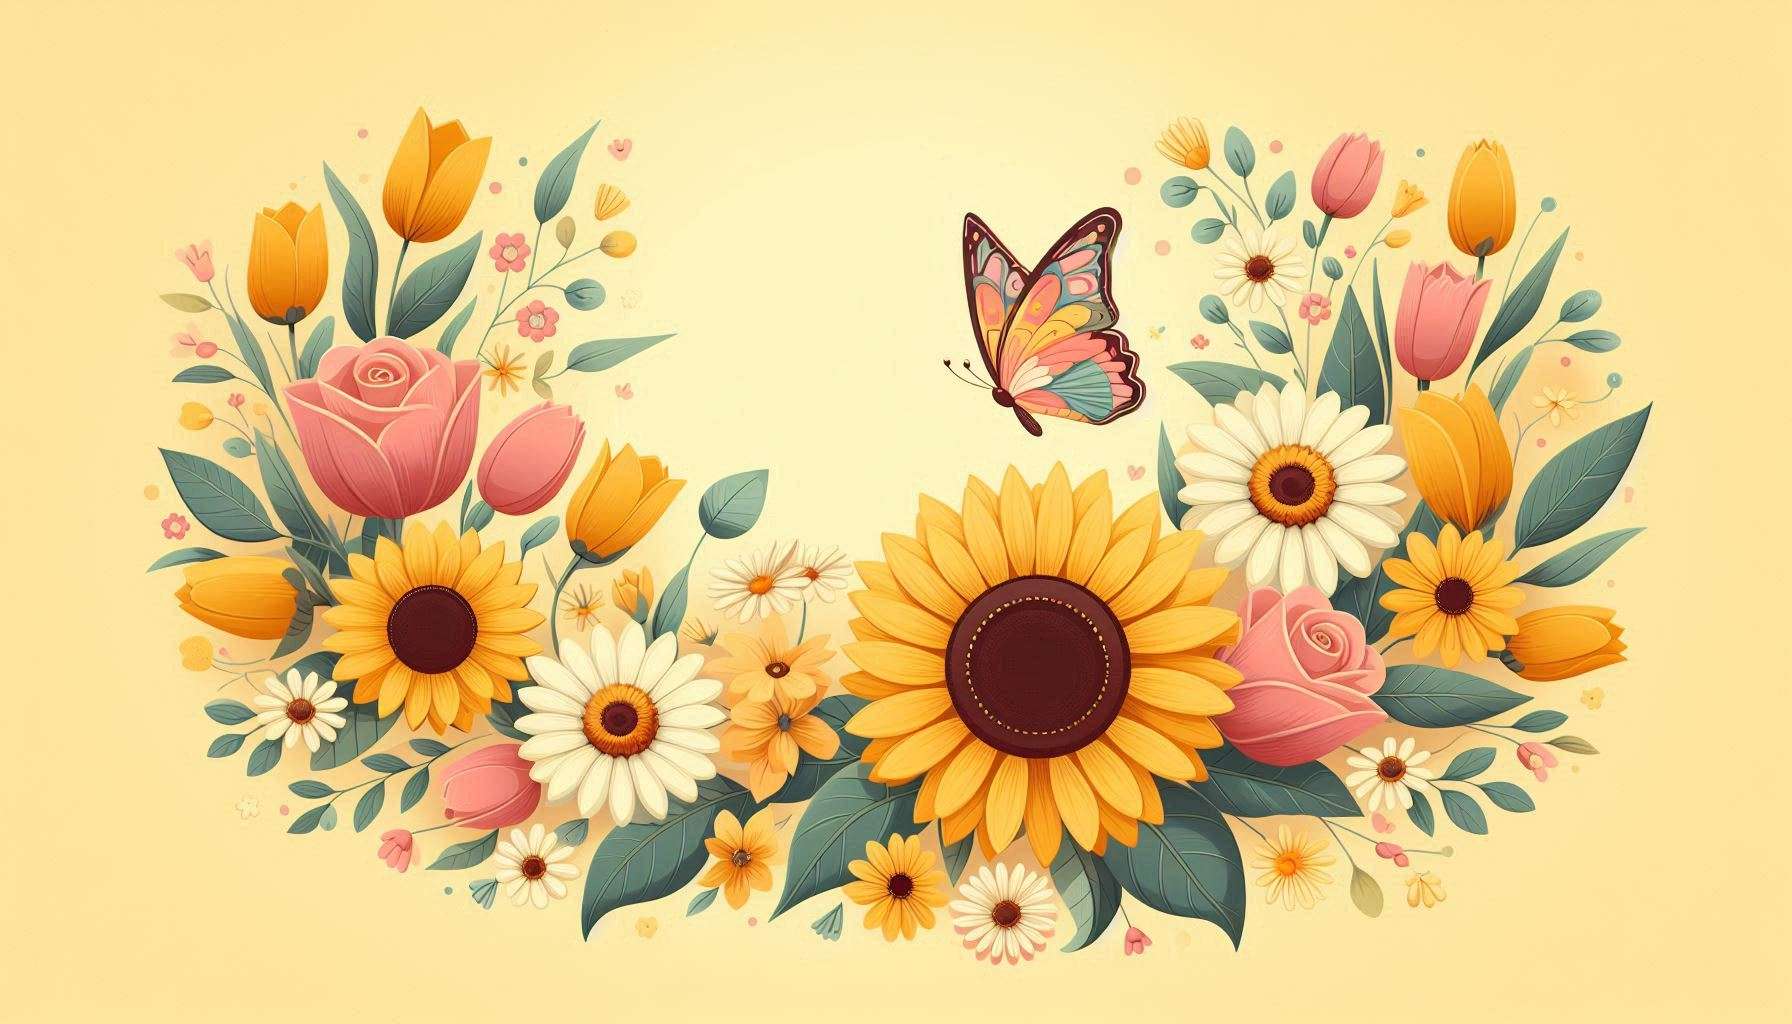 Download Free aesthetic light yellow background with flower and butterfly for websites, slideshows, and designs | royalty-free and unlimited use.